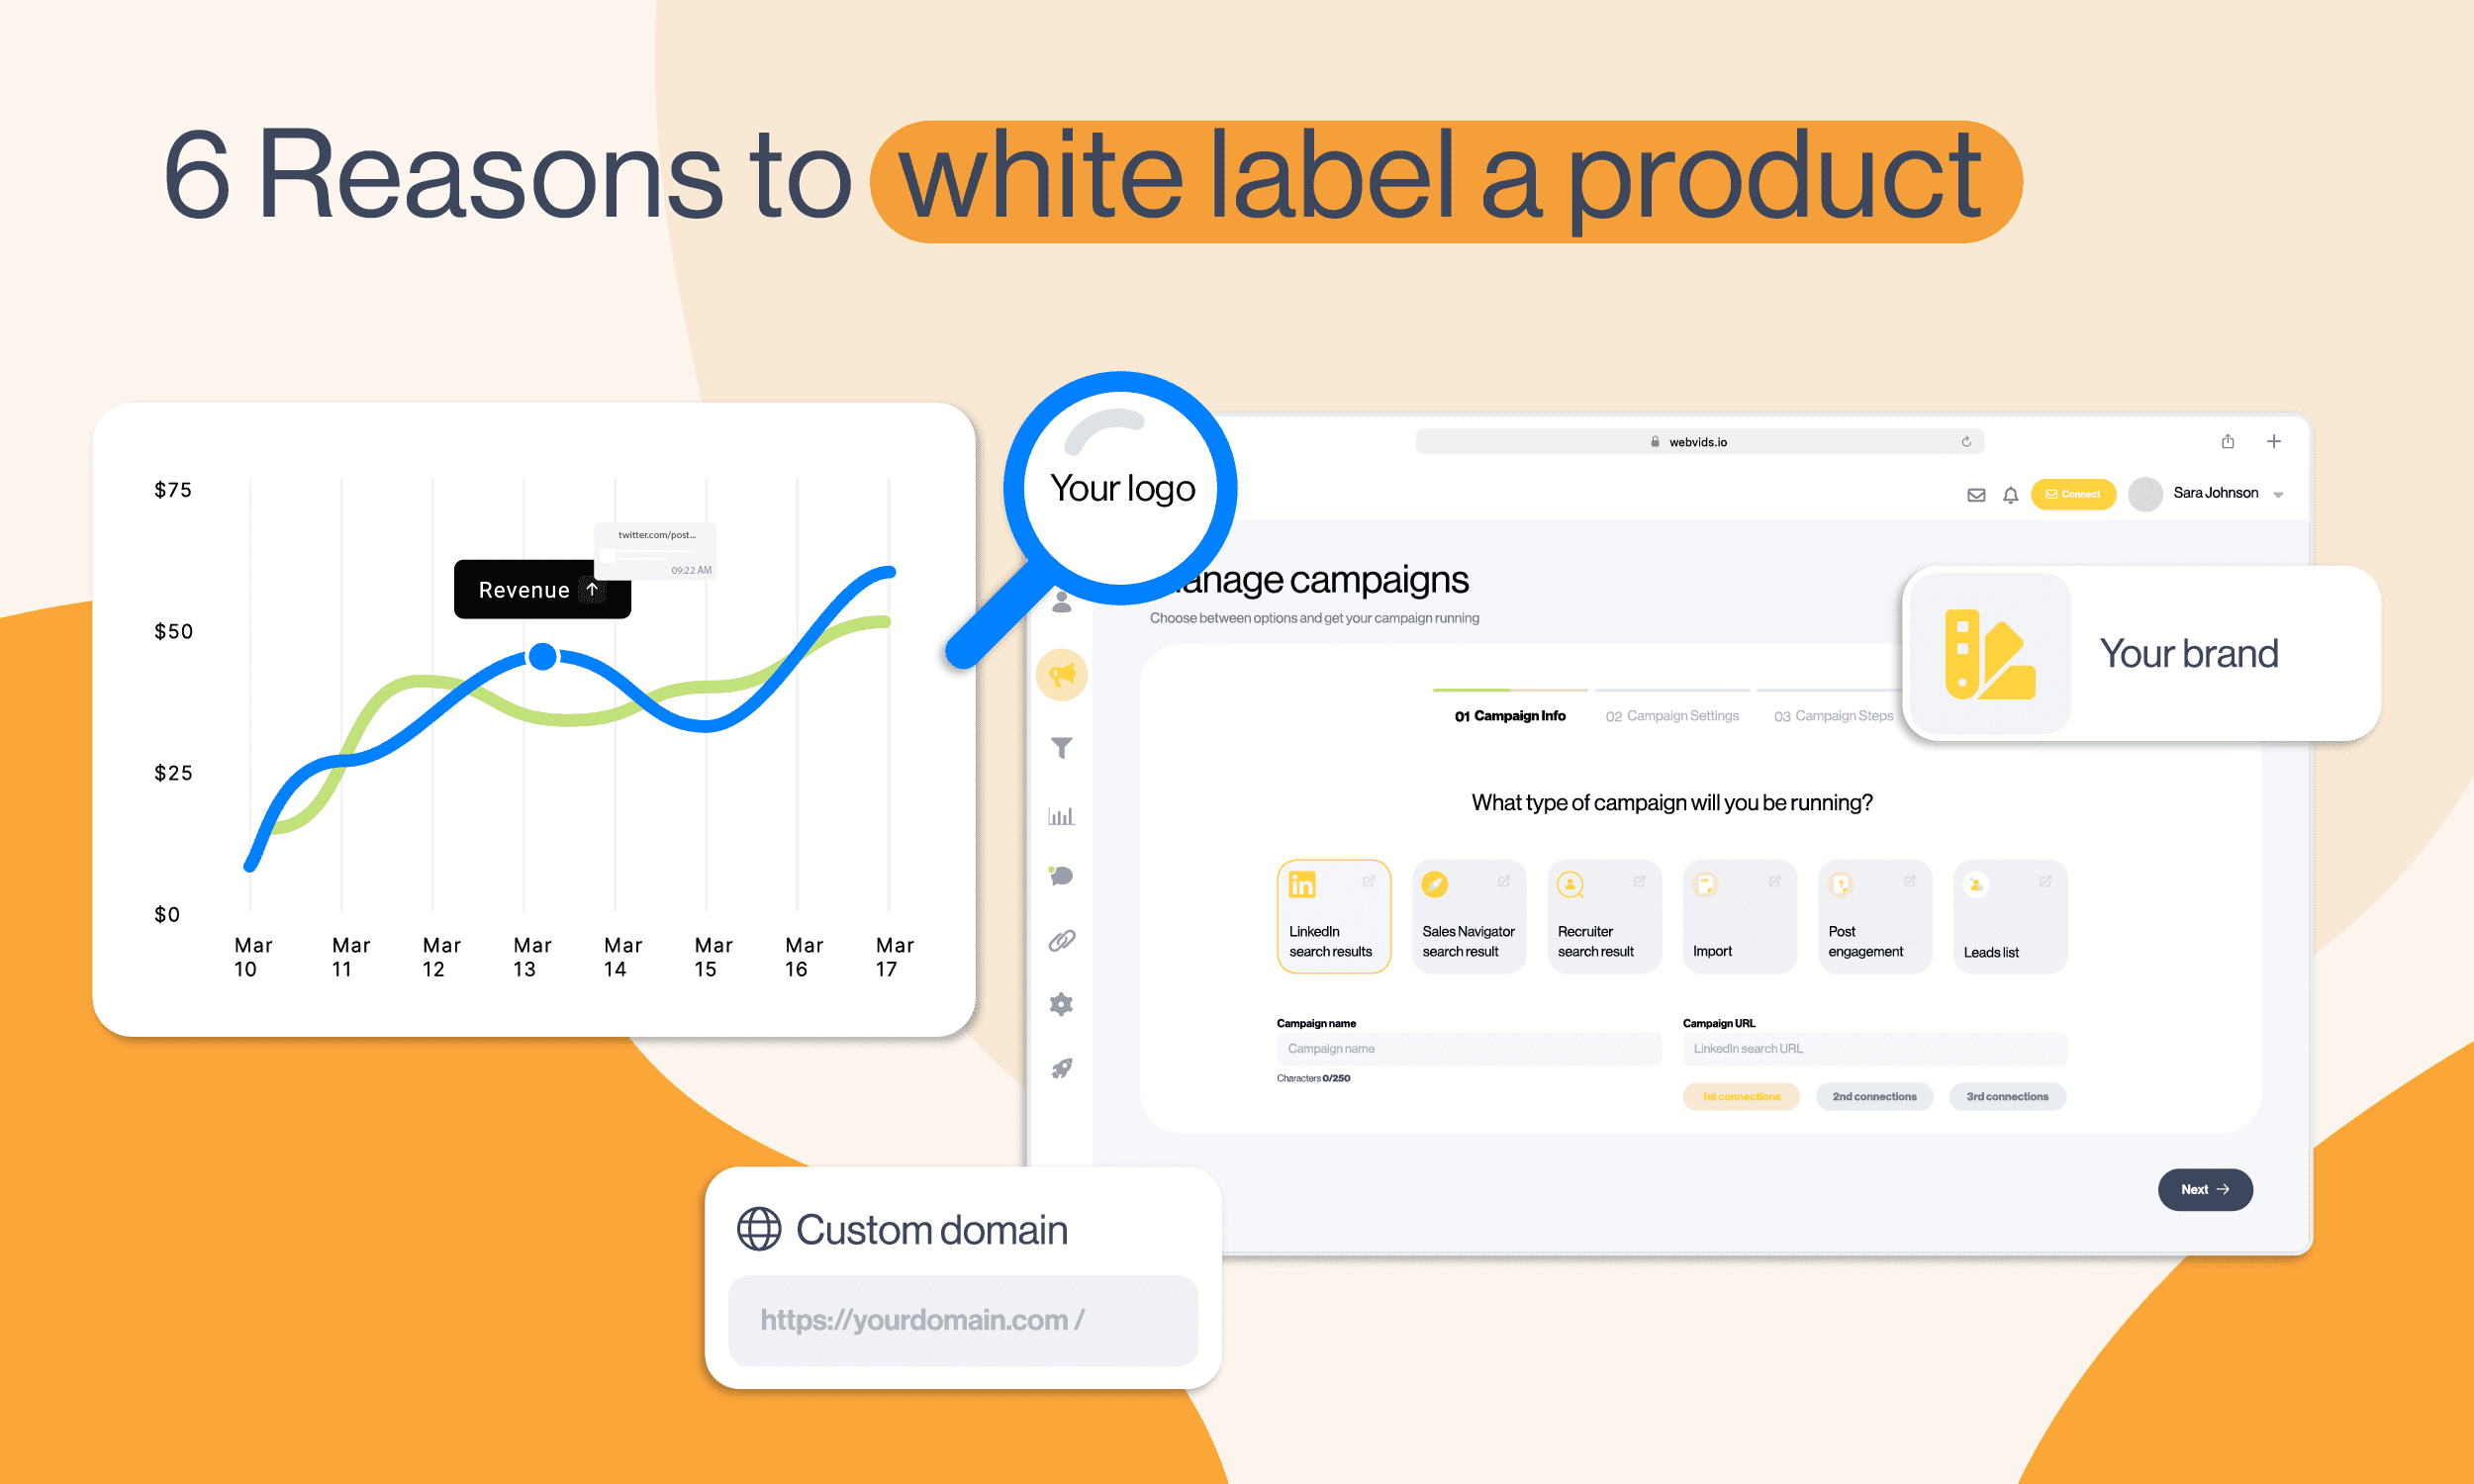 6 reasons to white label a product cover image